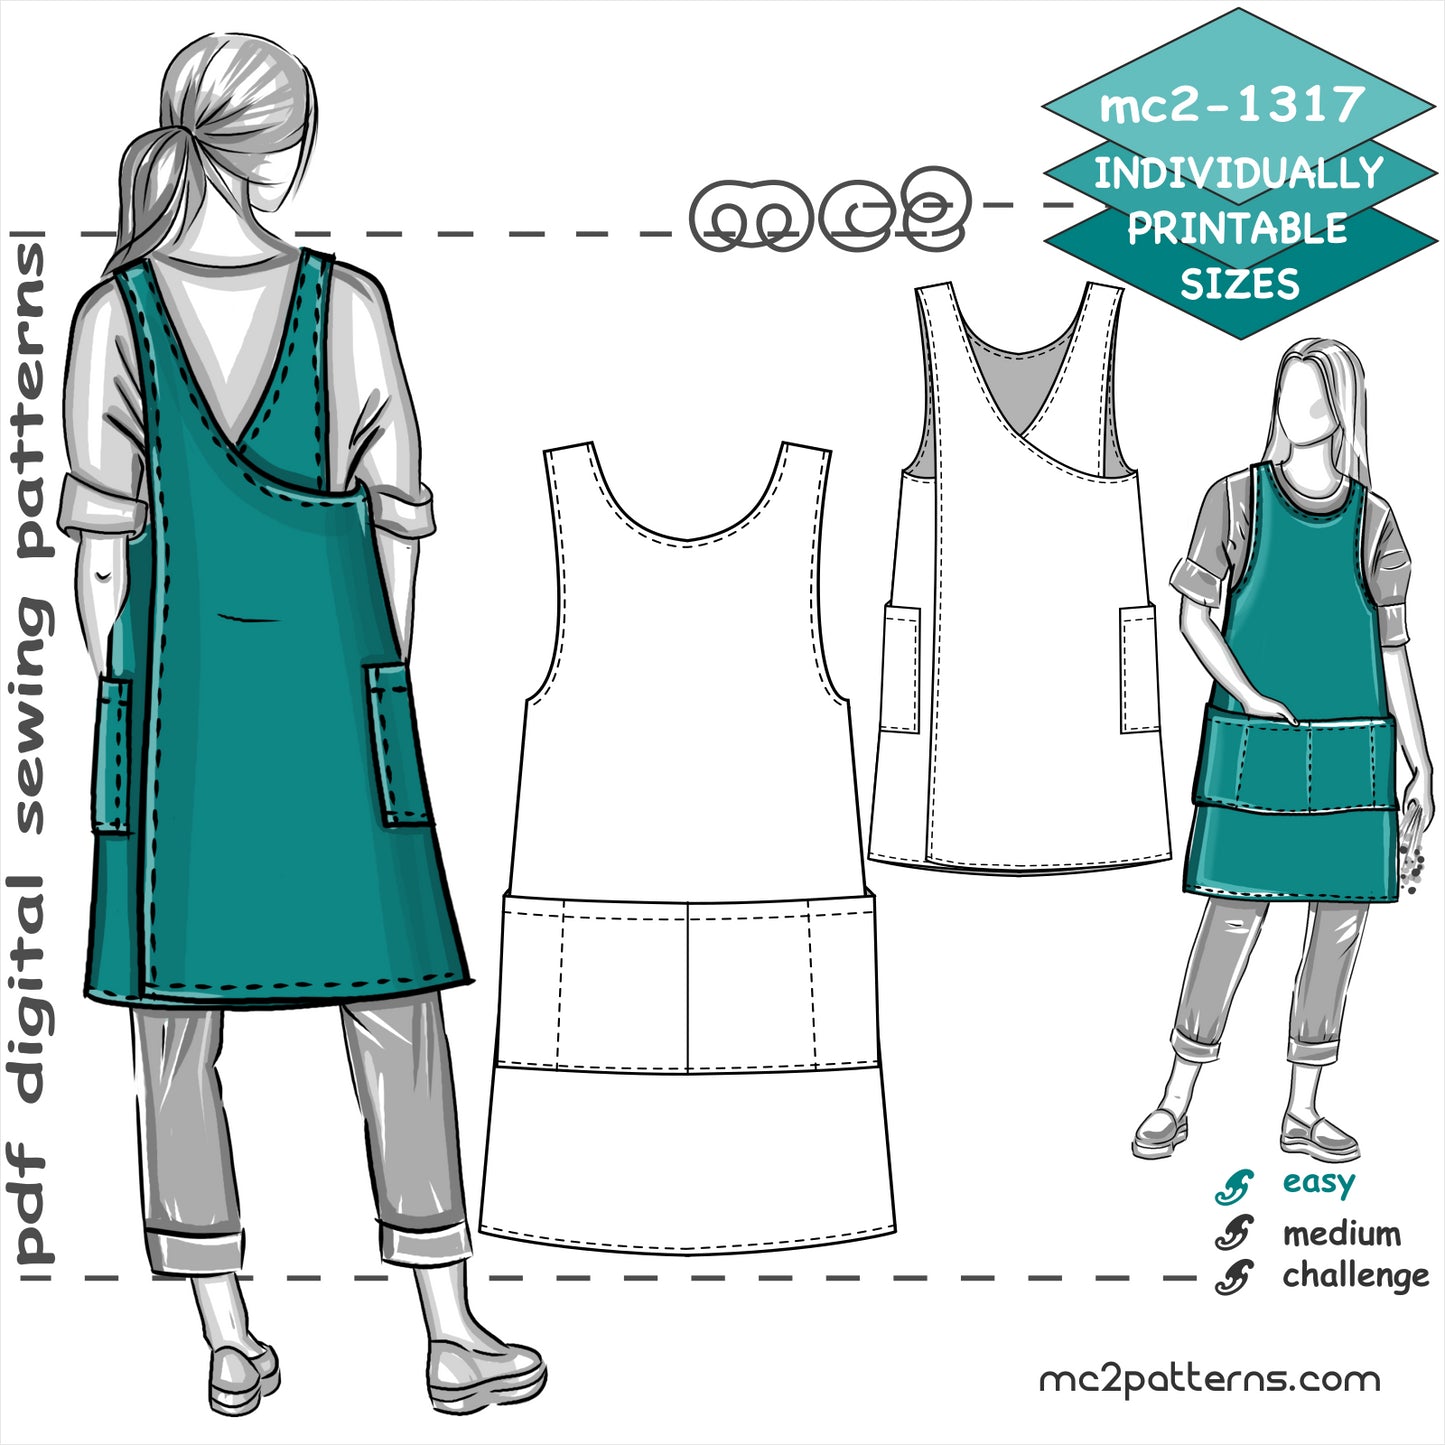 Japanese-style Cross-back Straight-shape/Boxy Pinafore Apron with NO-side-seams